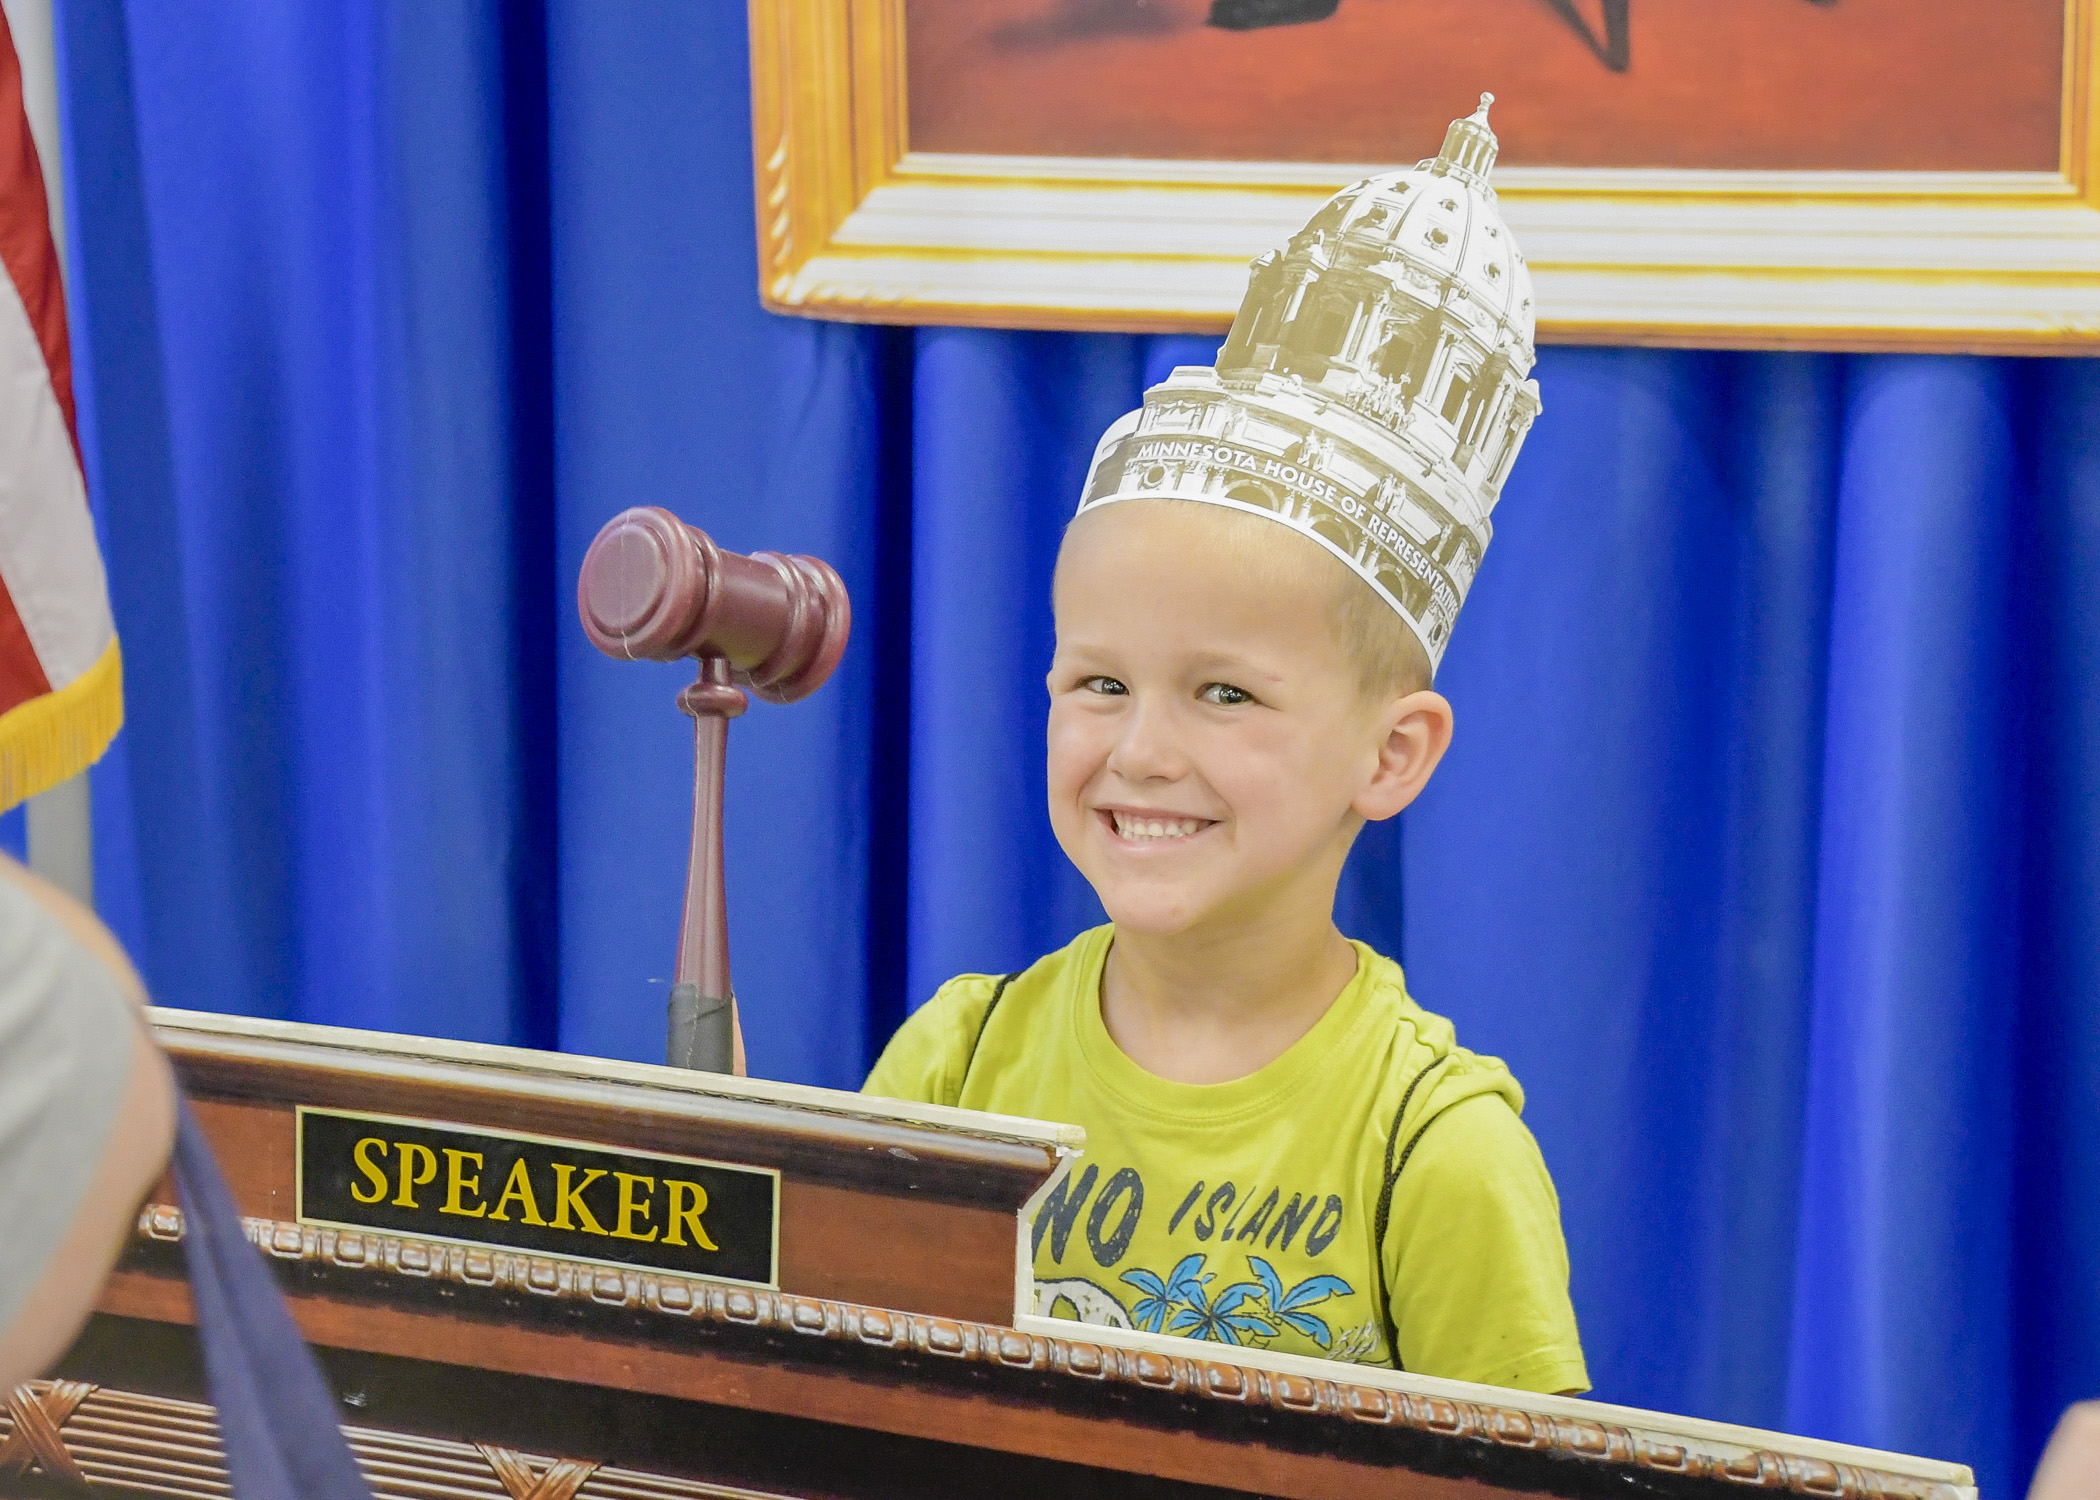 A young fairgoer gets to Be the Speaker at the 2021 Great Minnesota Get-Together. (House Photography file photo)